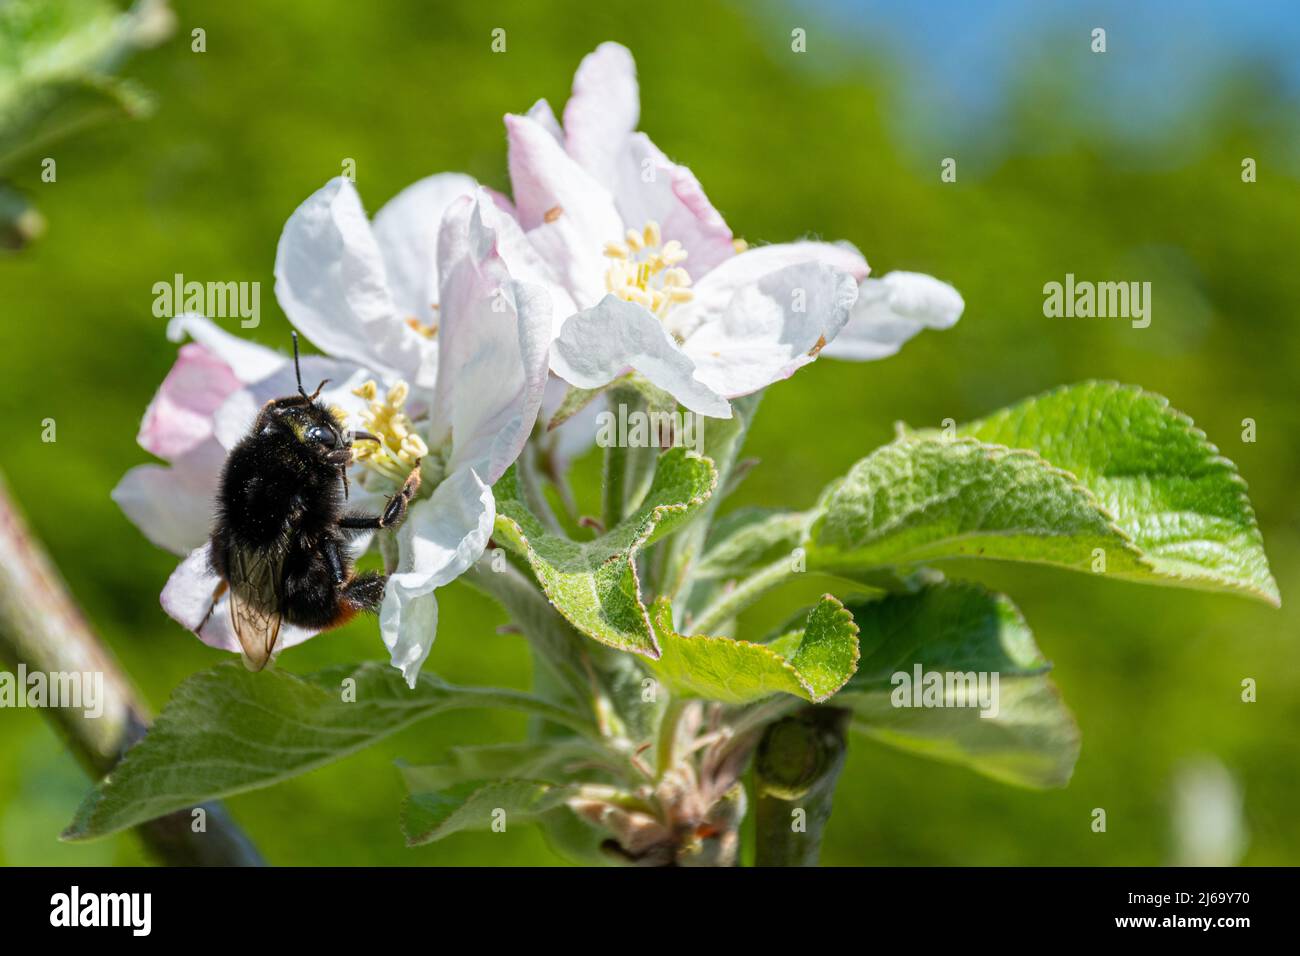 Red-tailed bumblebee (Bombus lapidarius), an insect pollinator, feeding on nectar from apple blossom, apple tree flowers, UK, during April Stock Photo